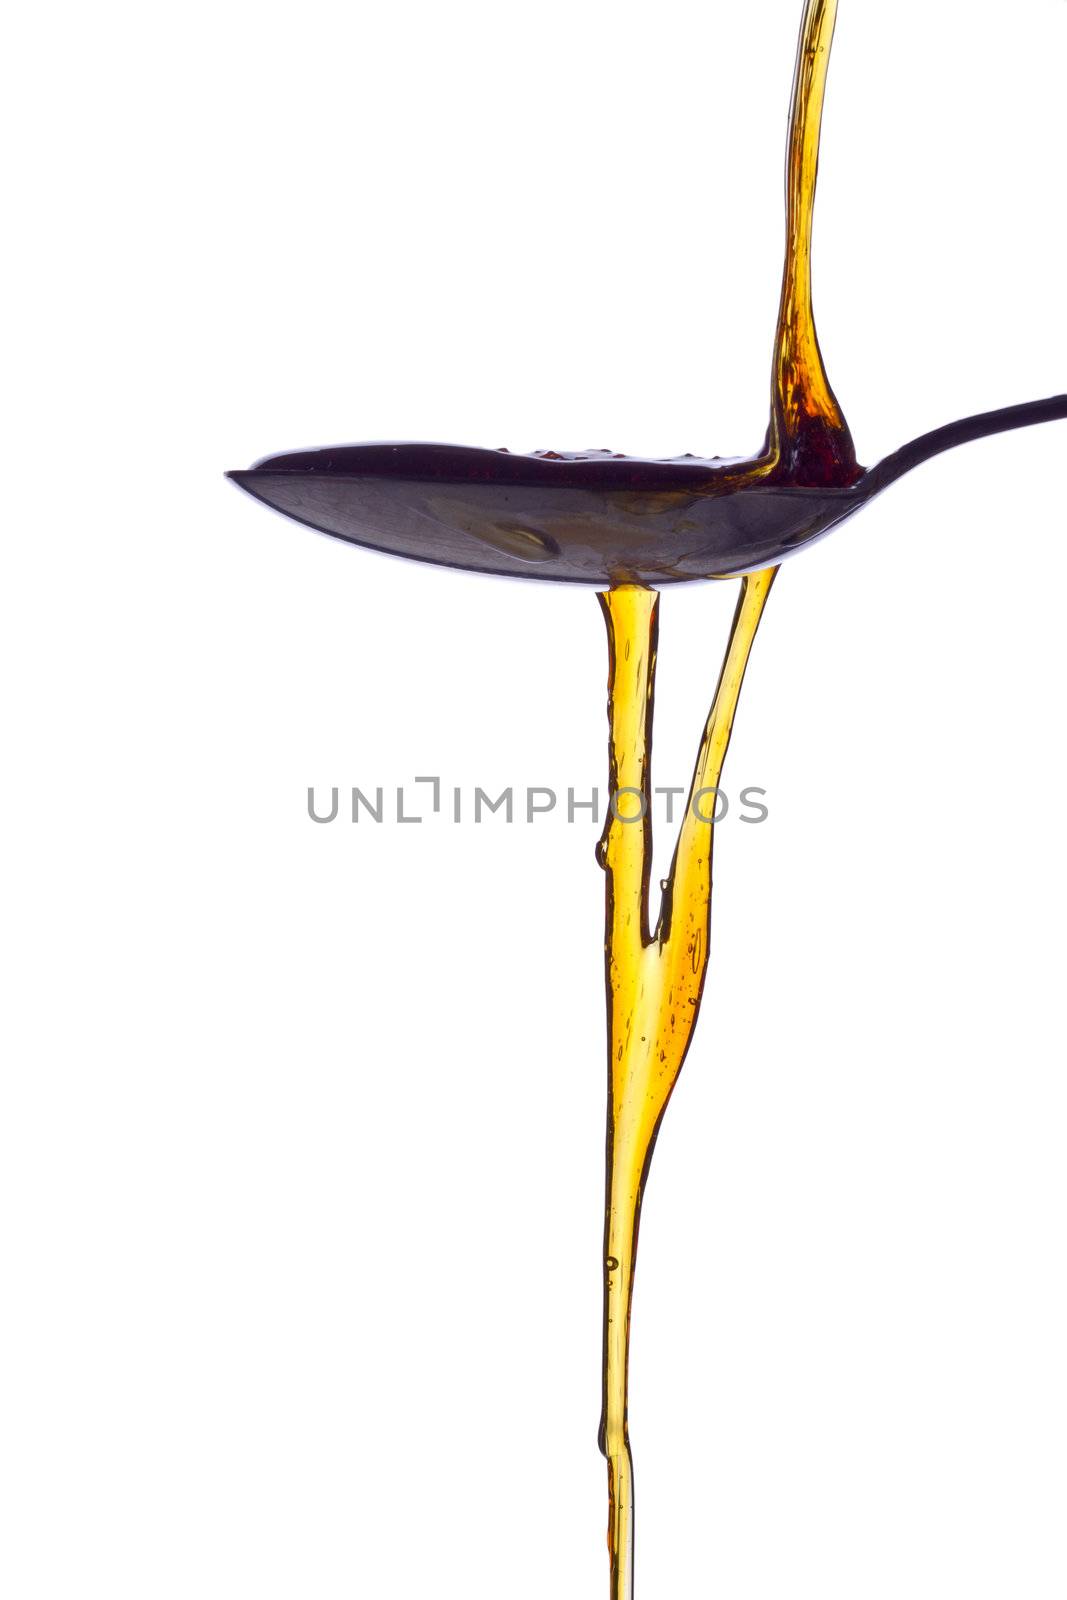 An inviting spoonful of syrup being poured out.